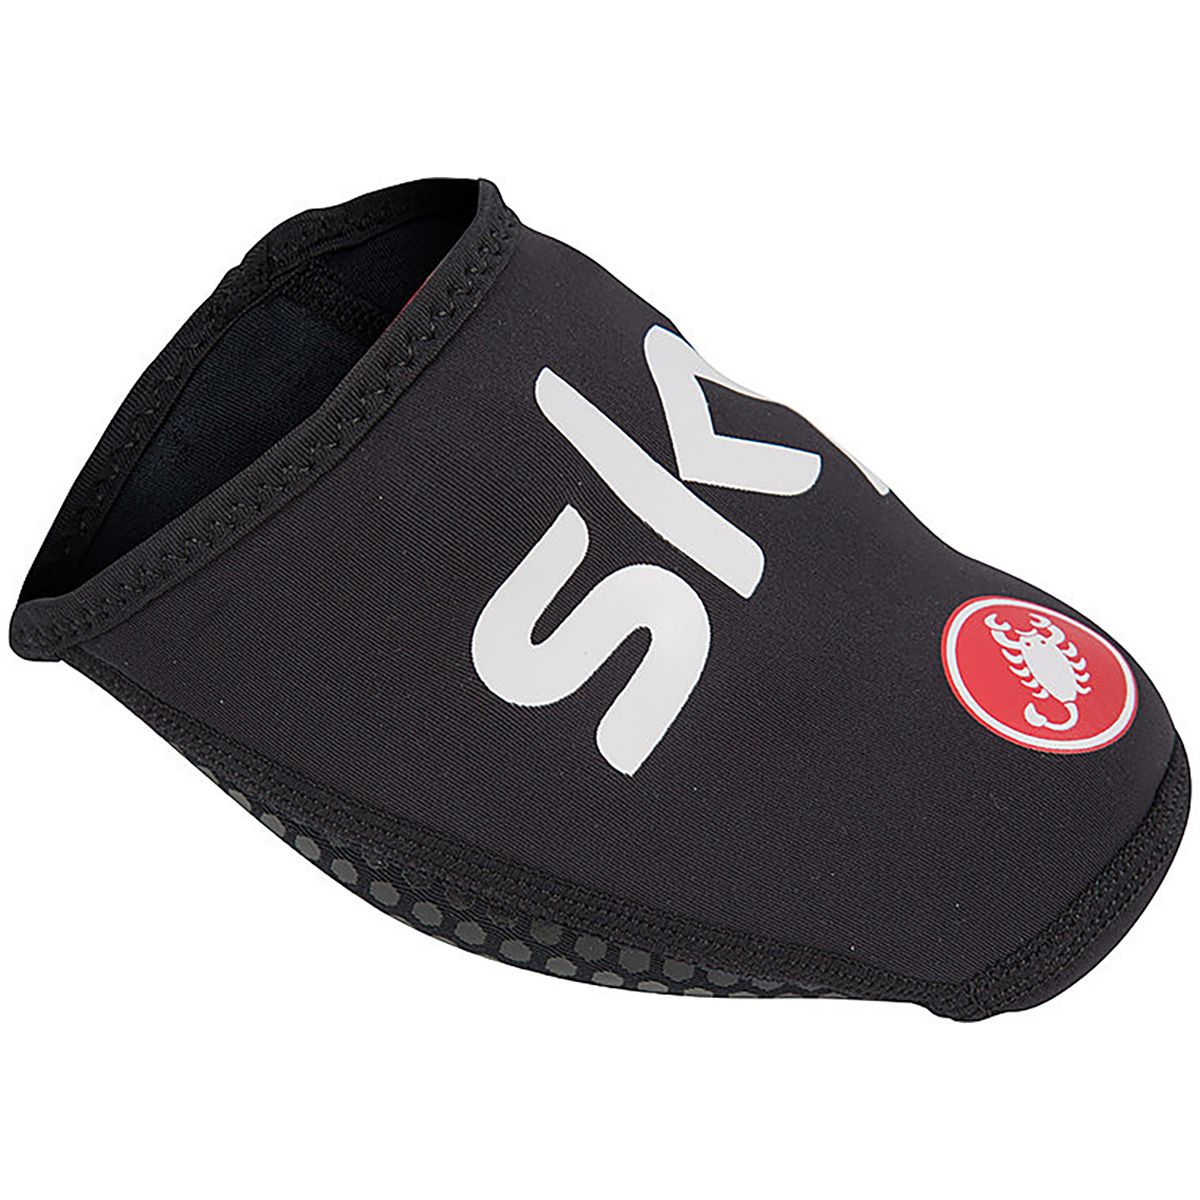 Castelli Team Sky Toe Thingy 2 Bootie